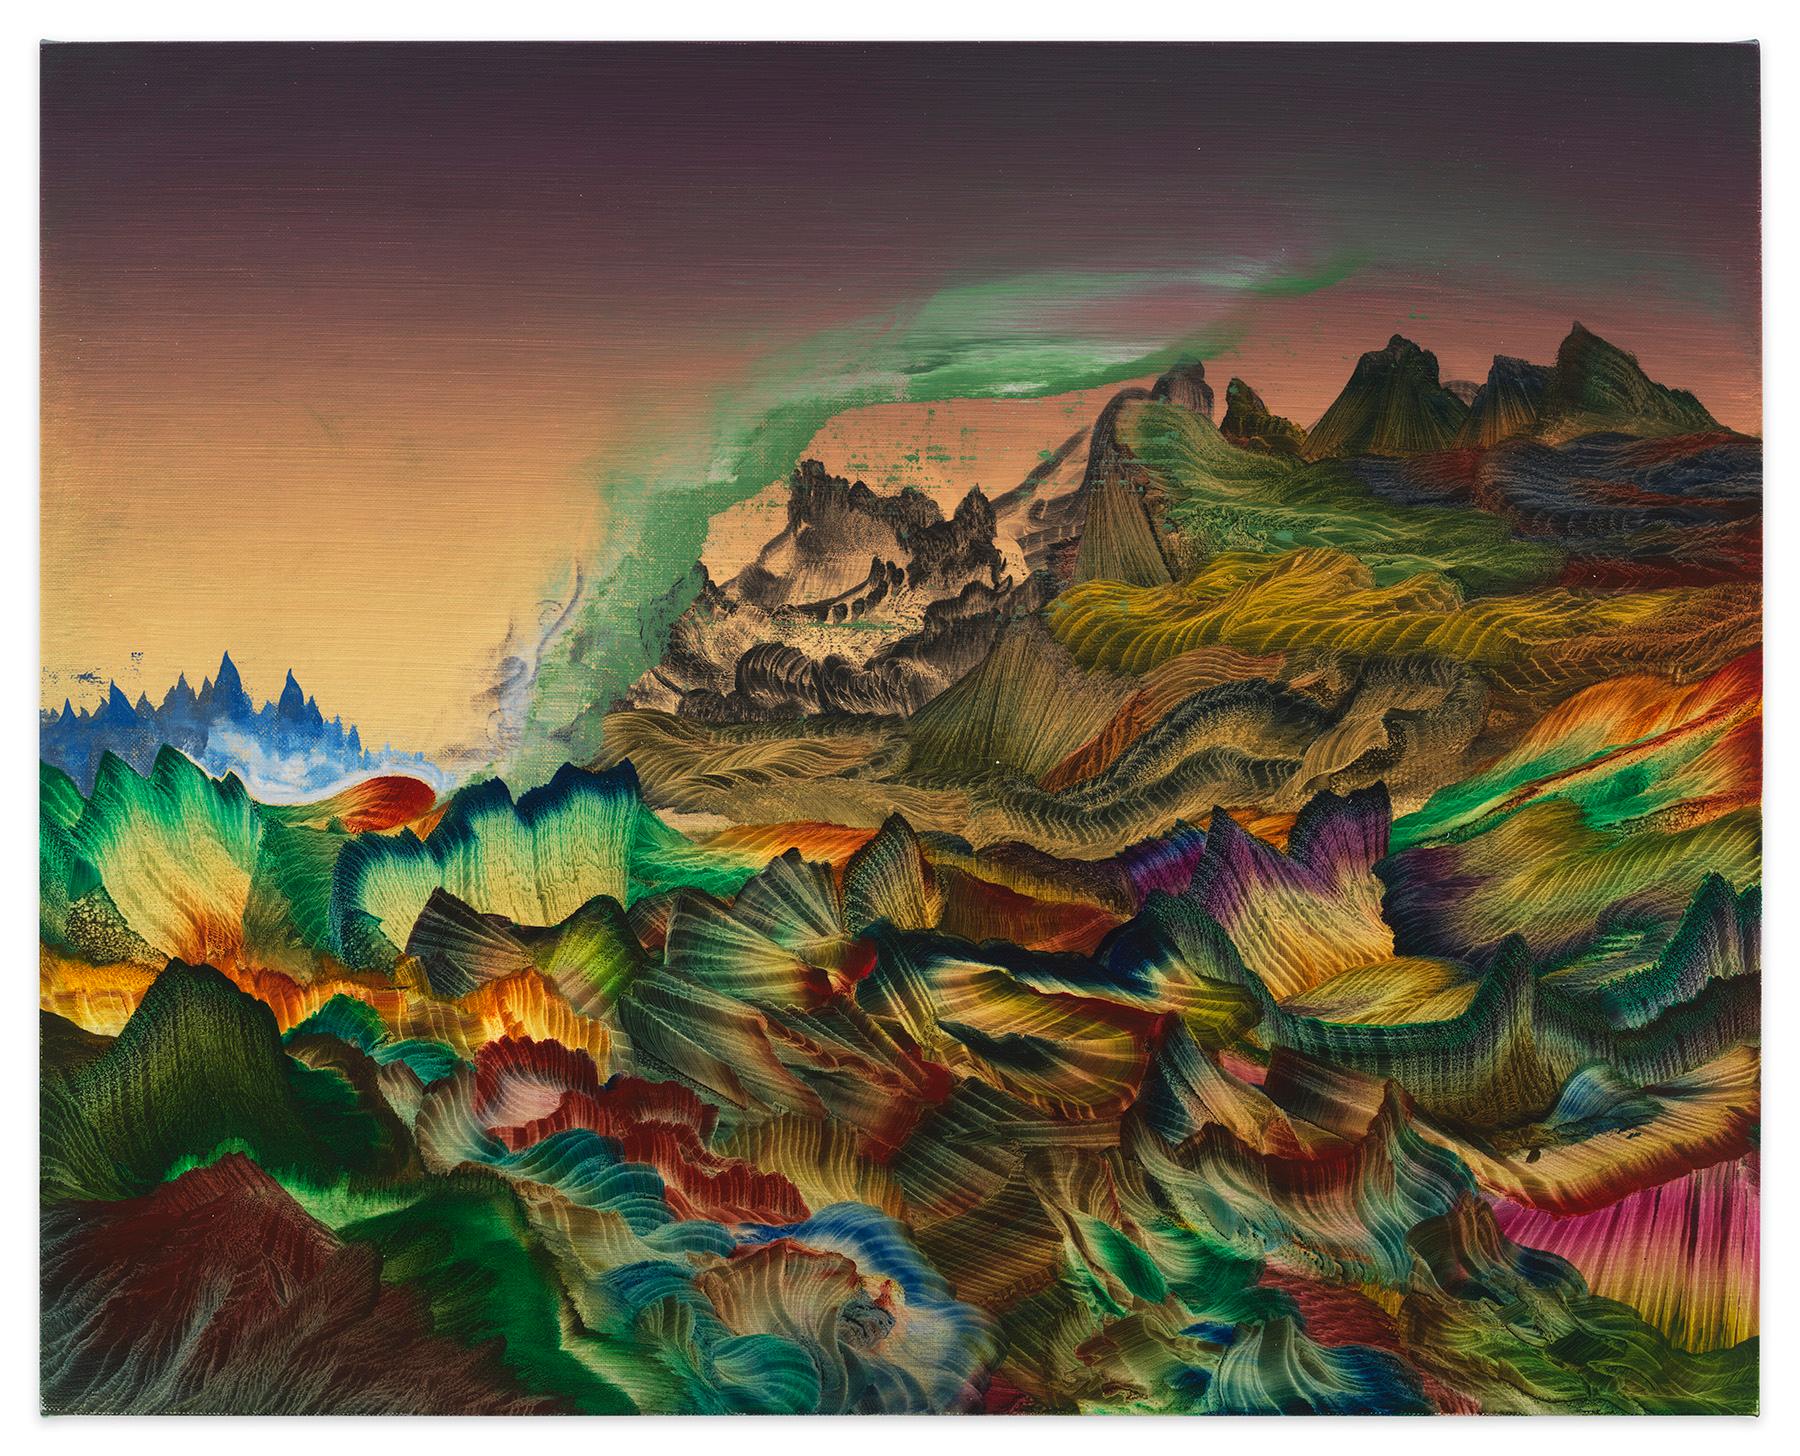 Blending traditional landscape painting with abstraction, "Palpitations" is a new addition to Jonathan Ferrara Gallery's collection of works by Elliott Green. "Palpitations" was produced in 2022, using oil paint on linen.

Elliott Green was born in